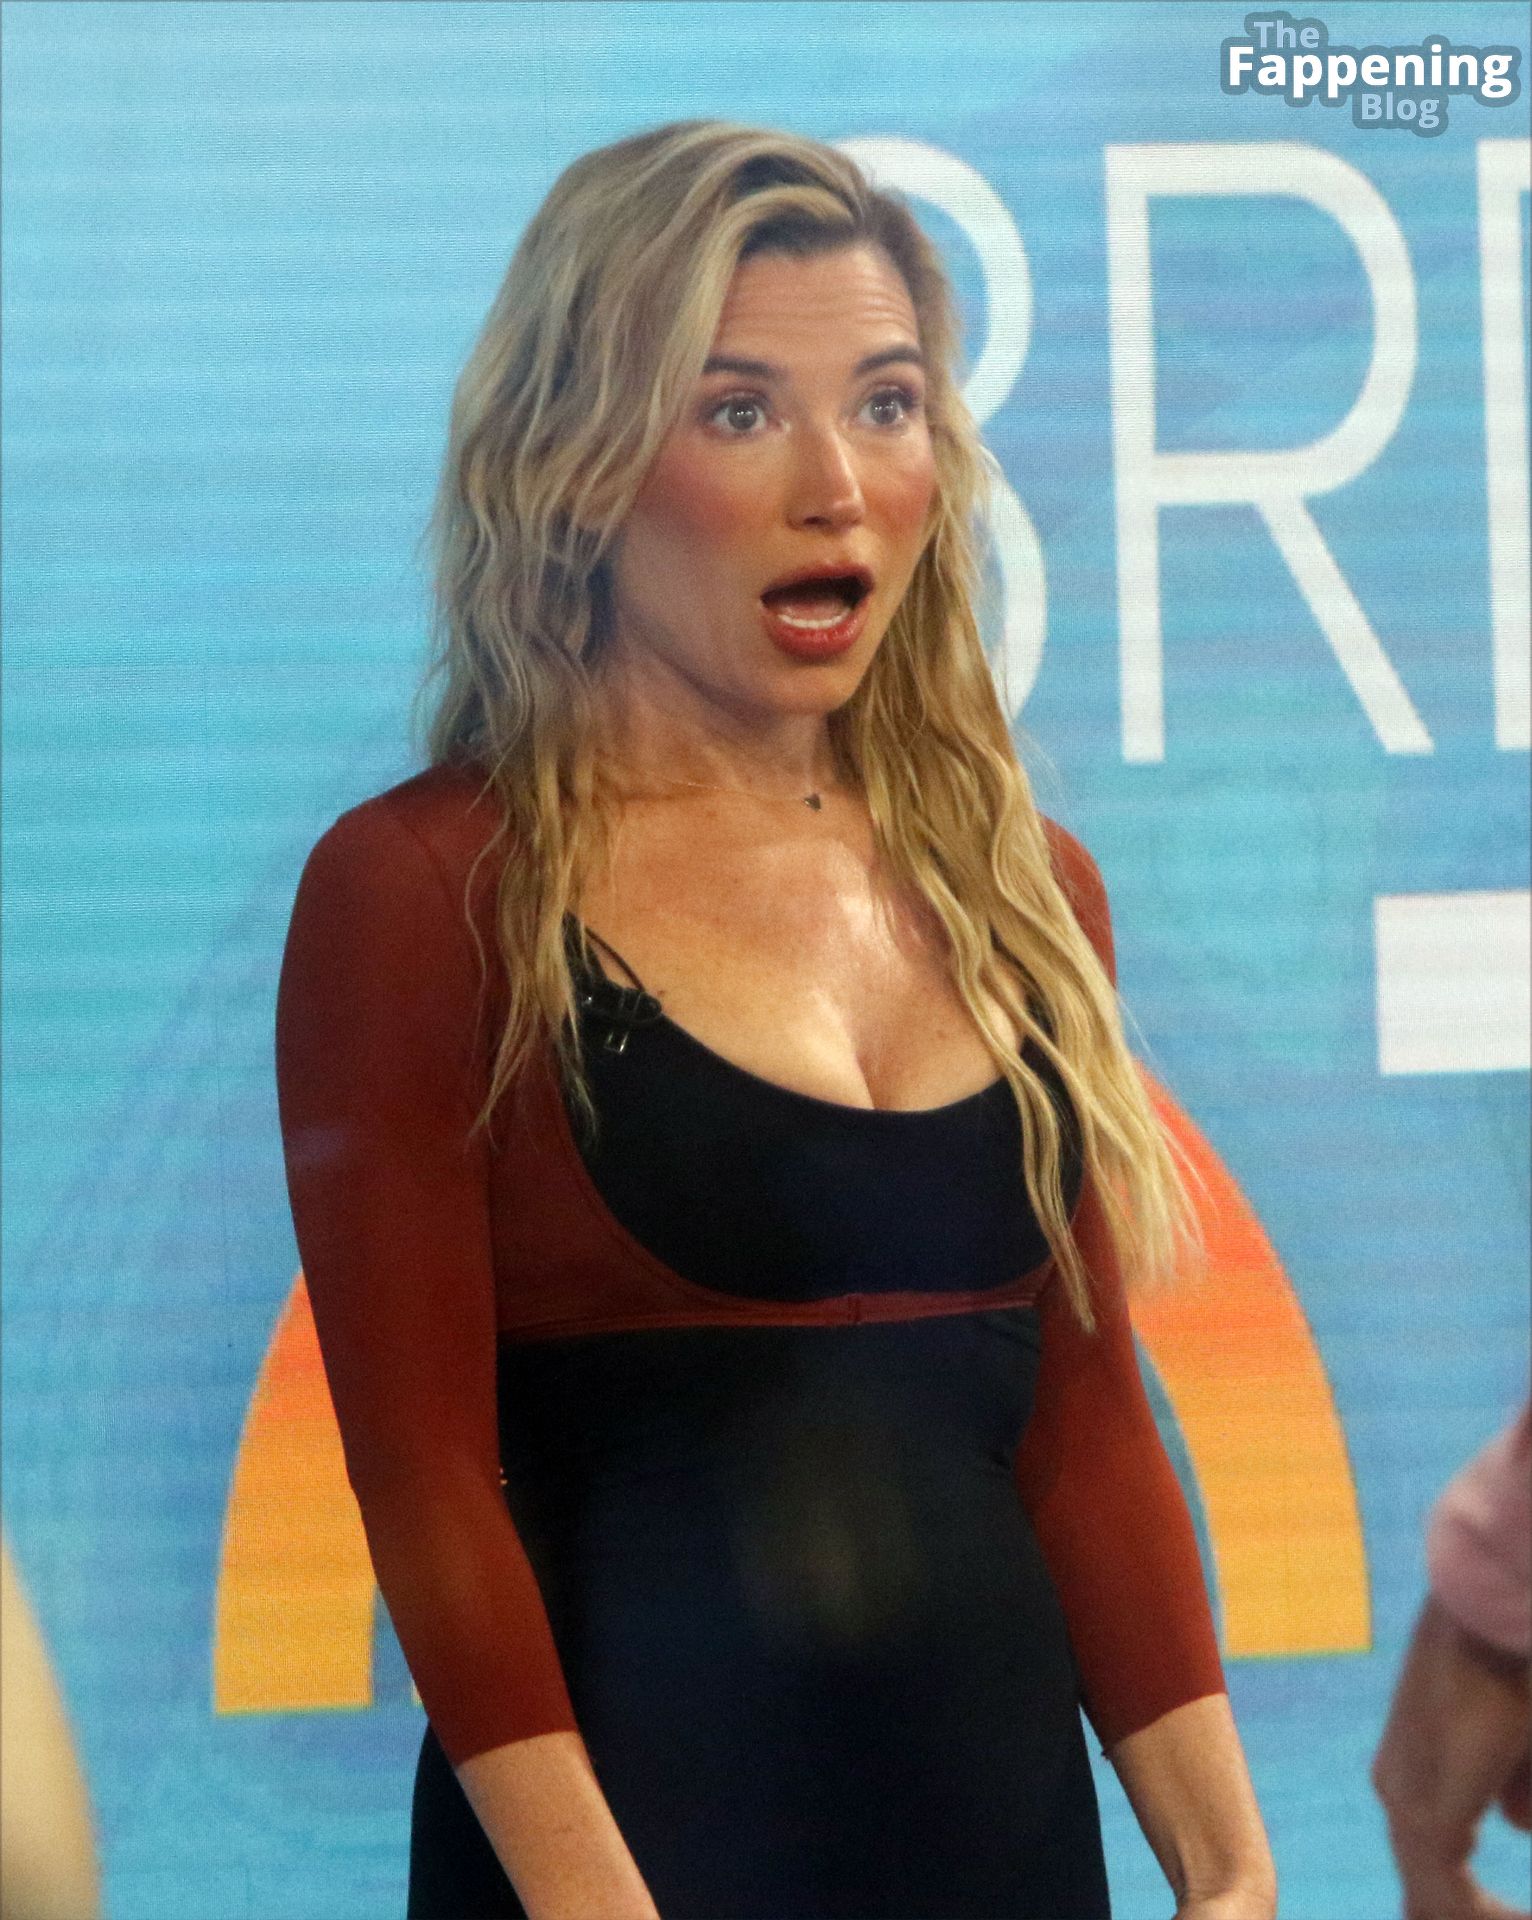 Tracy Anderson Displays Her Fit Body on Today Show (24 Photos)